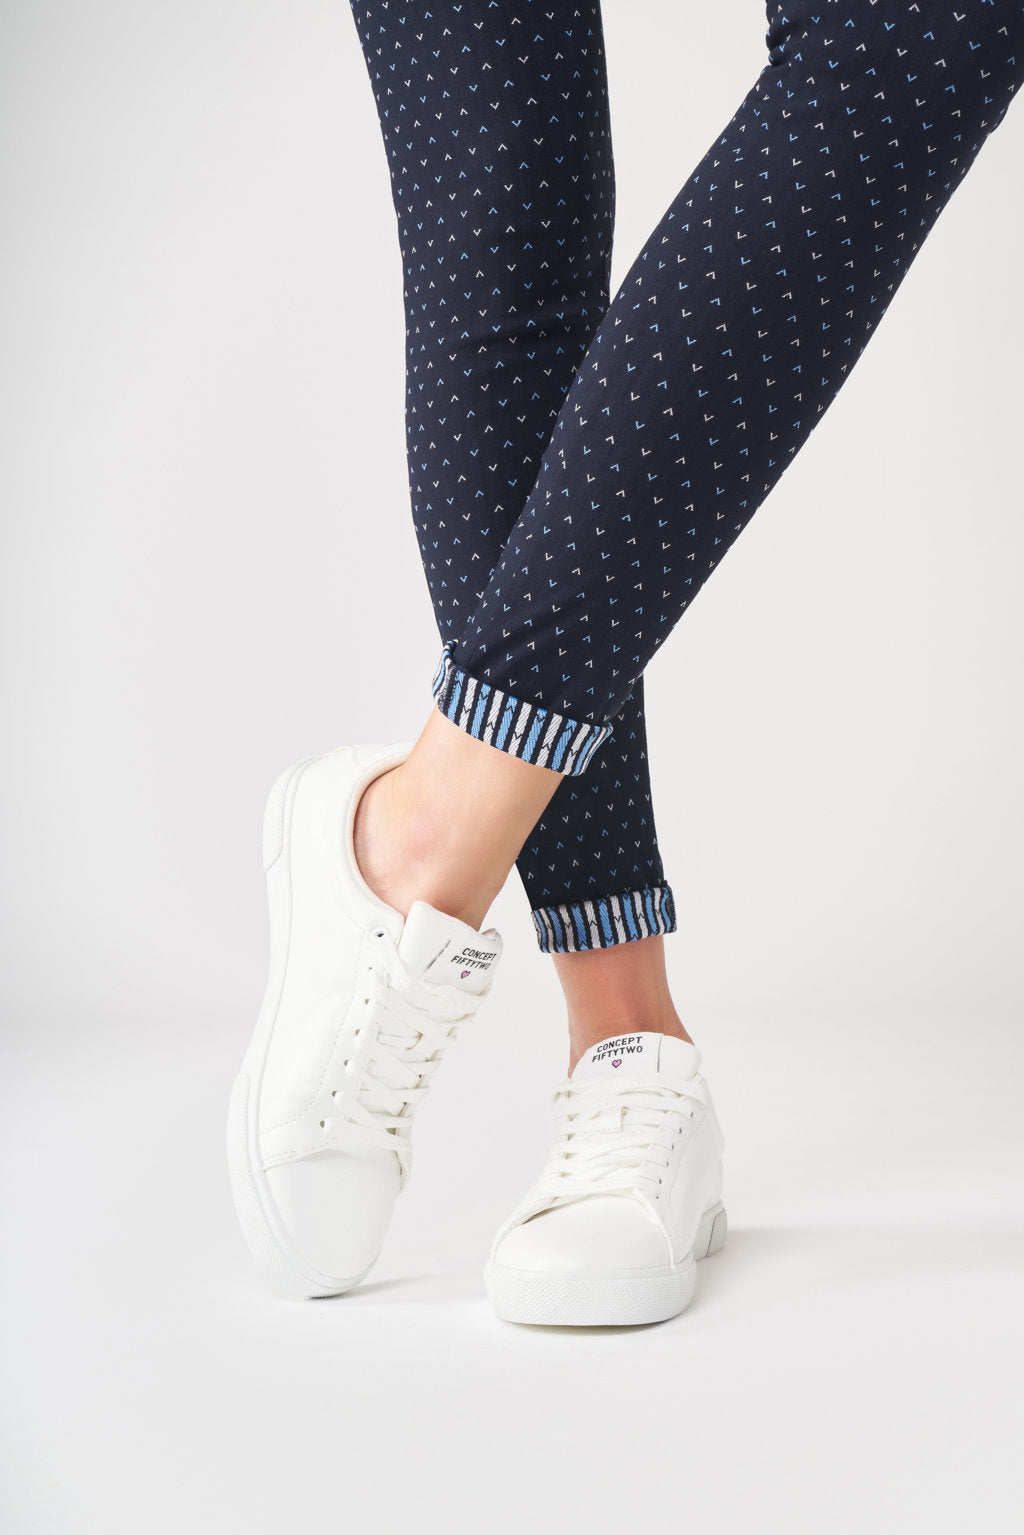 SiSi Microgeometria Legging - Navy stretch trouser leggings made of viscose with a woven v style pattern in light blue and white and navy, blue and white striped turn up cuff and rear pockets.